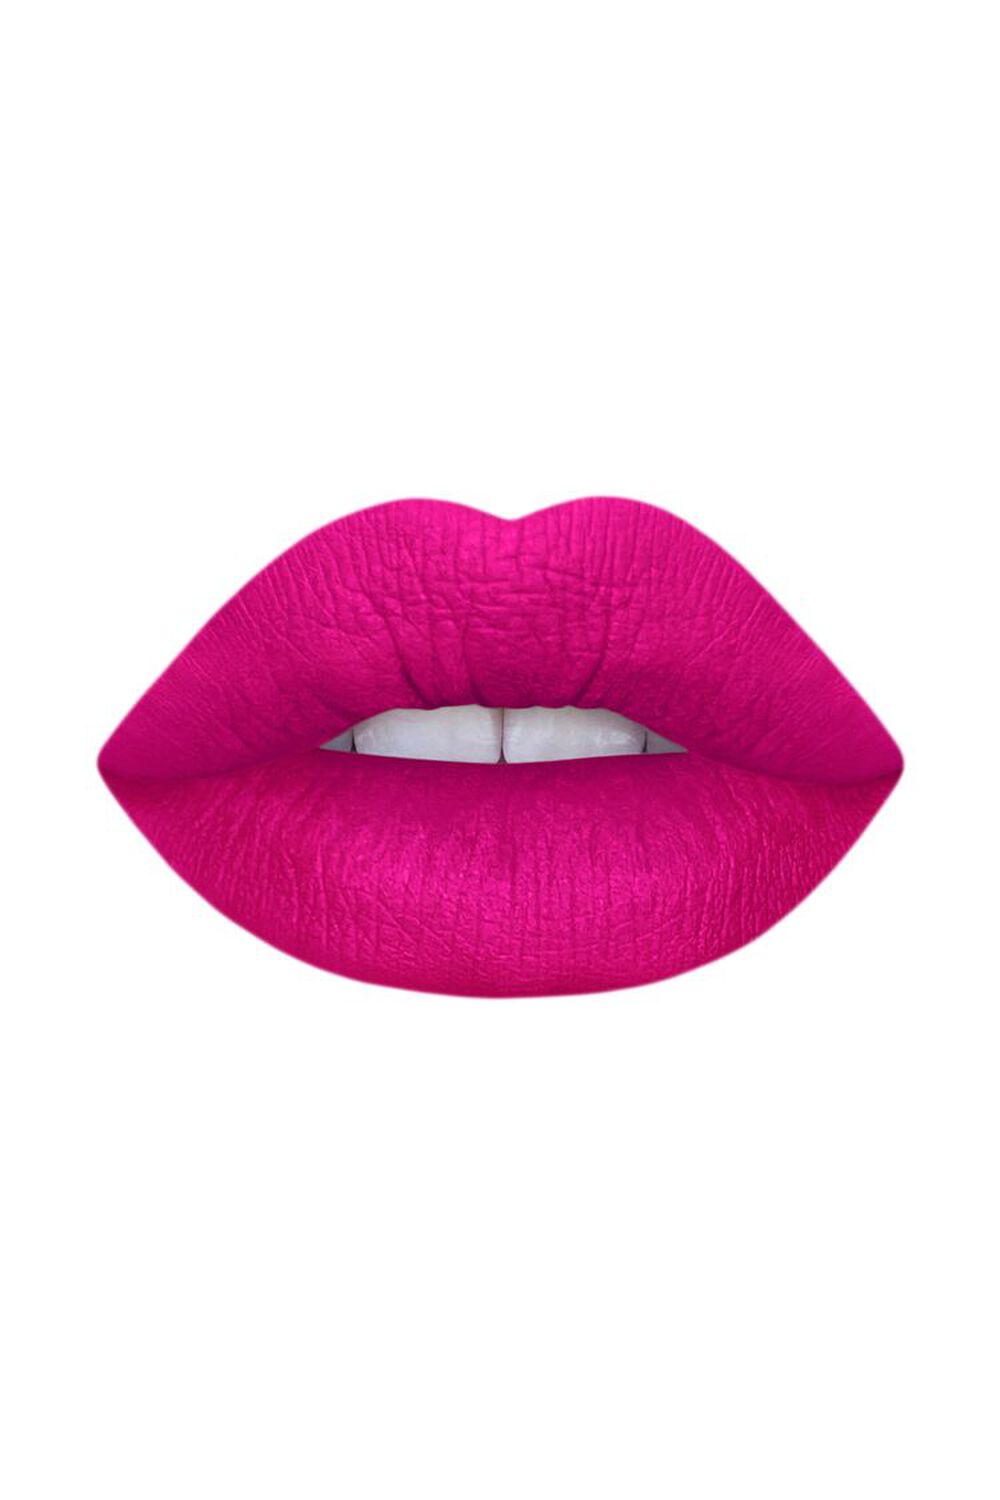 Lime Crime Soft Touch Lipstick			, image 2